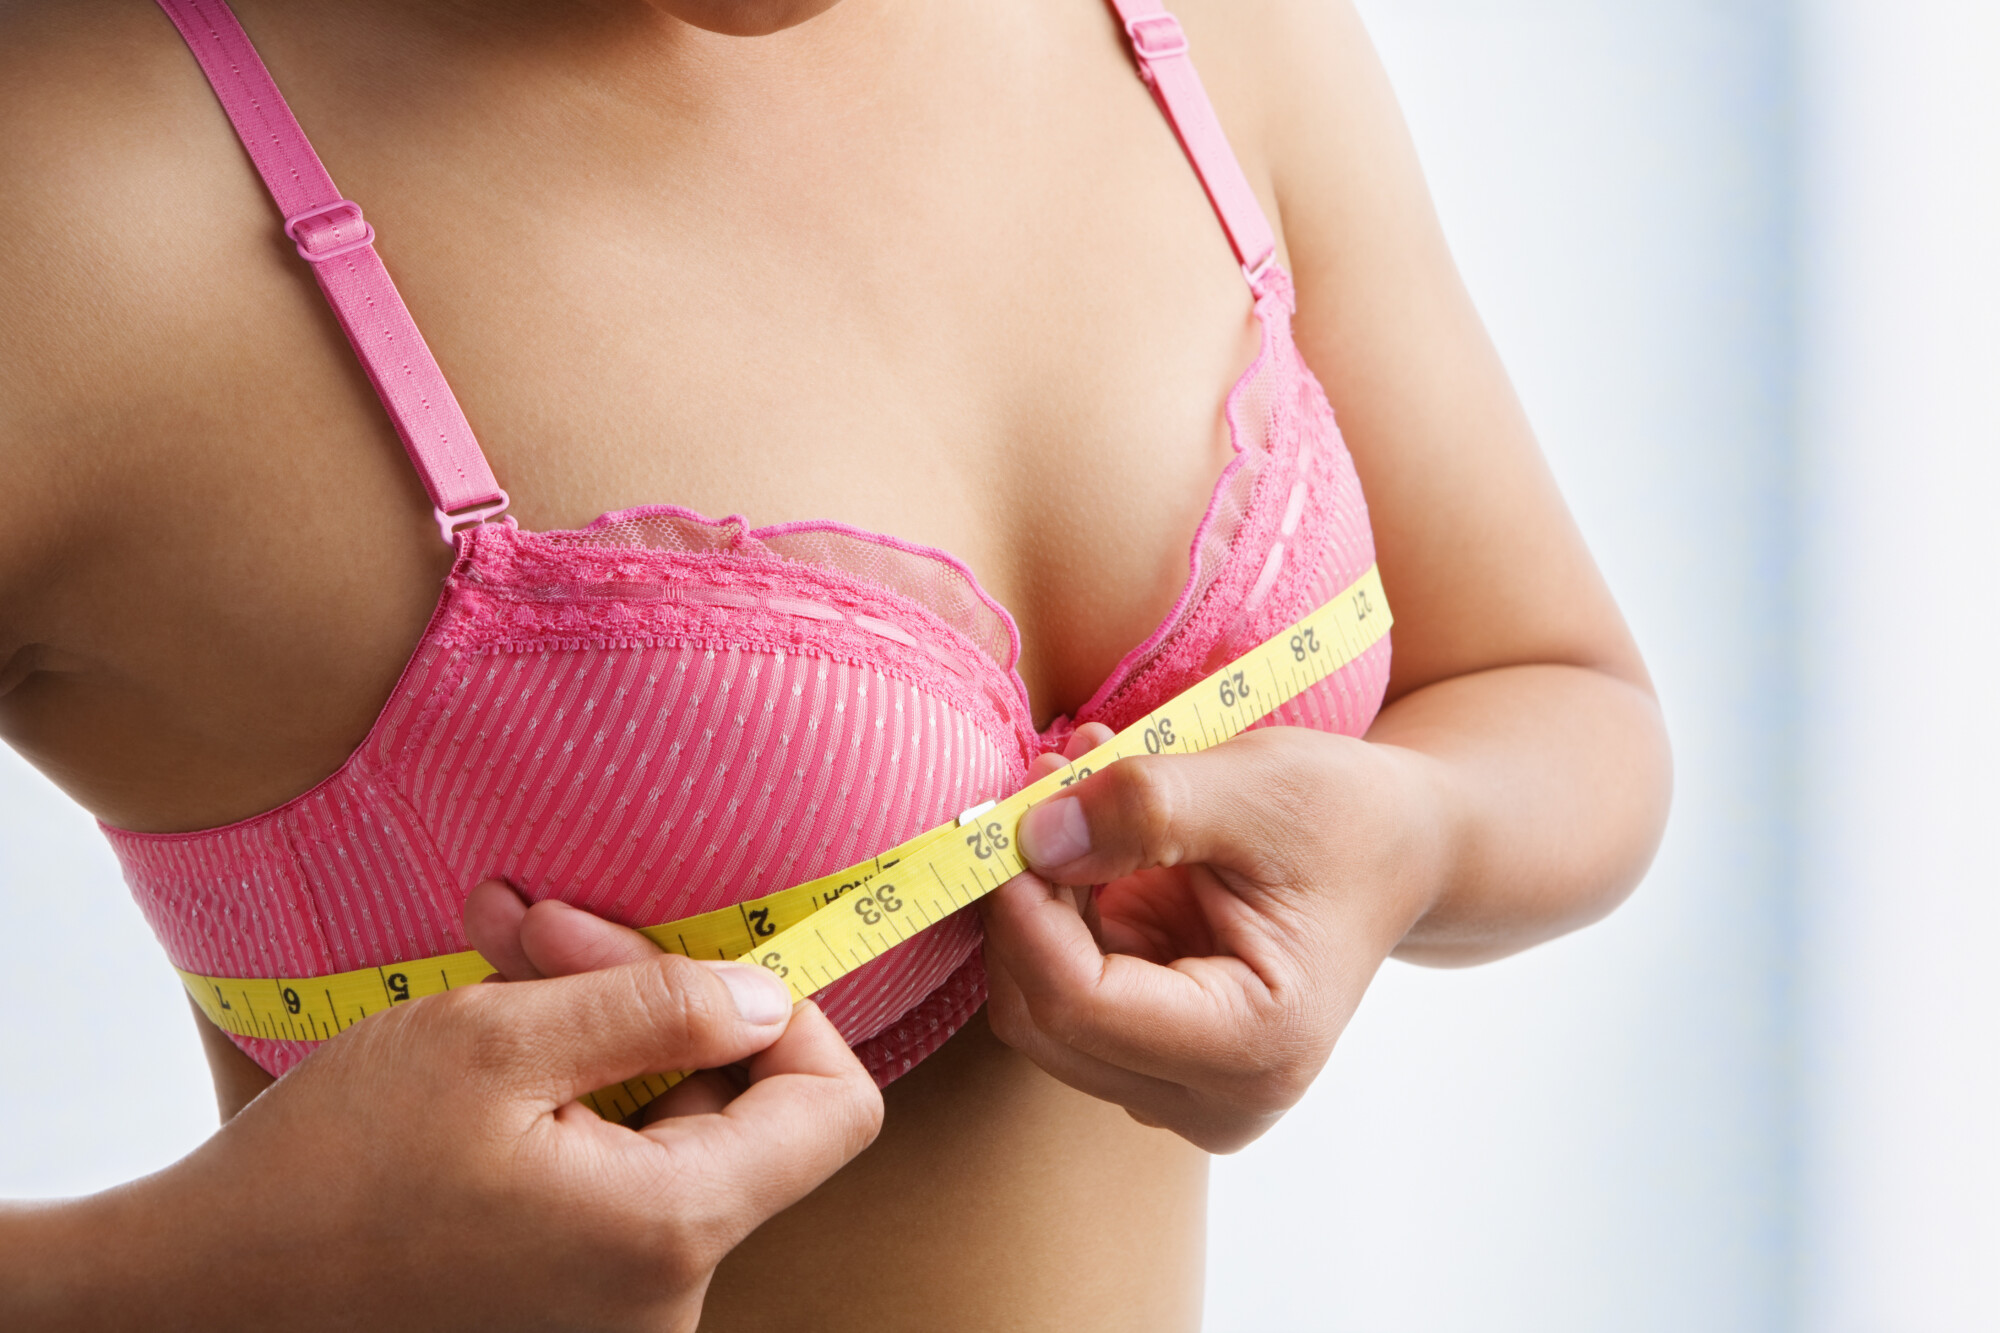 Does Breast Size or Shape Impact Self-Esteem? Expert Insight